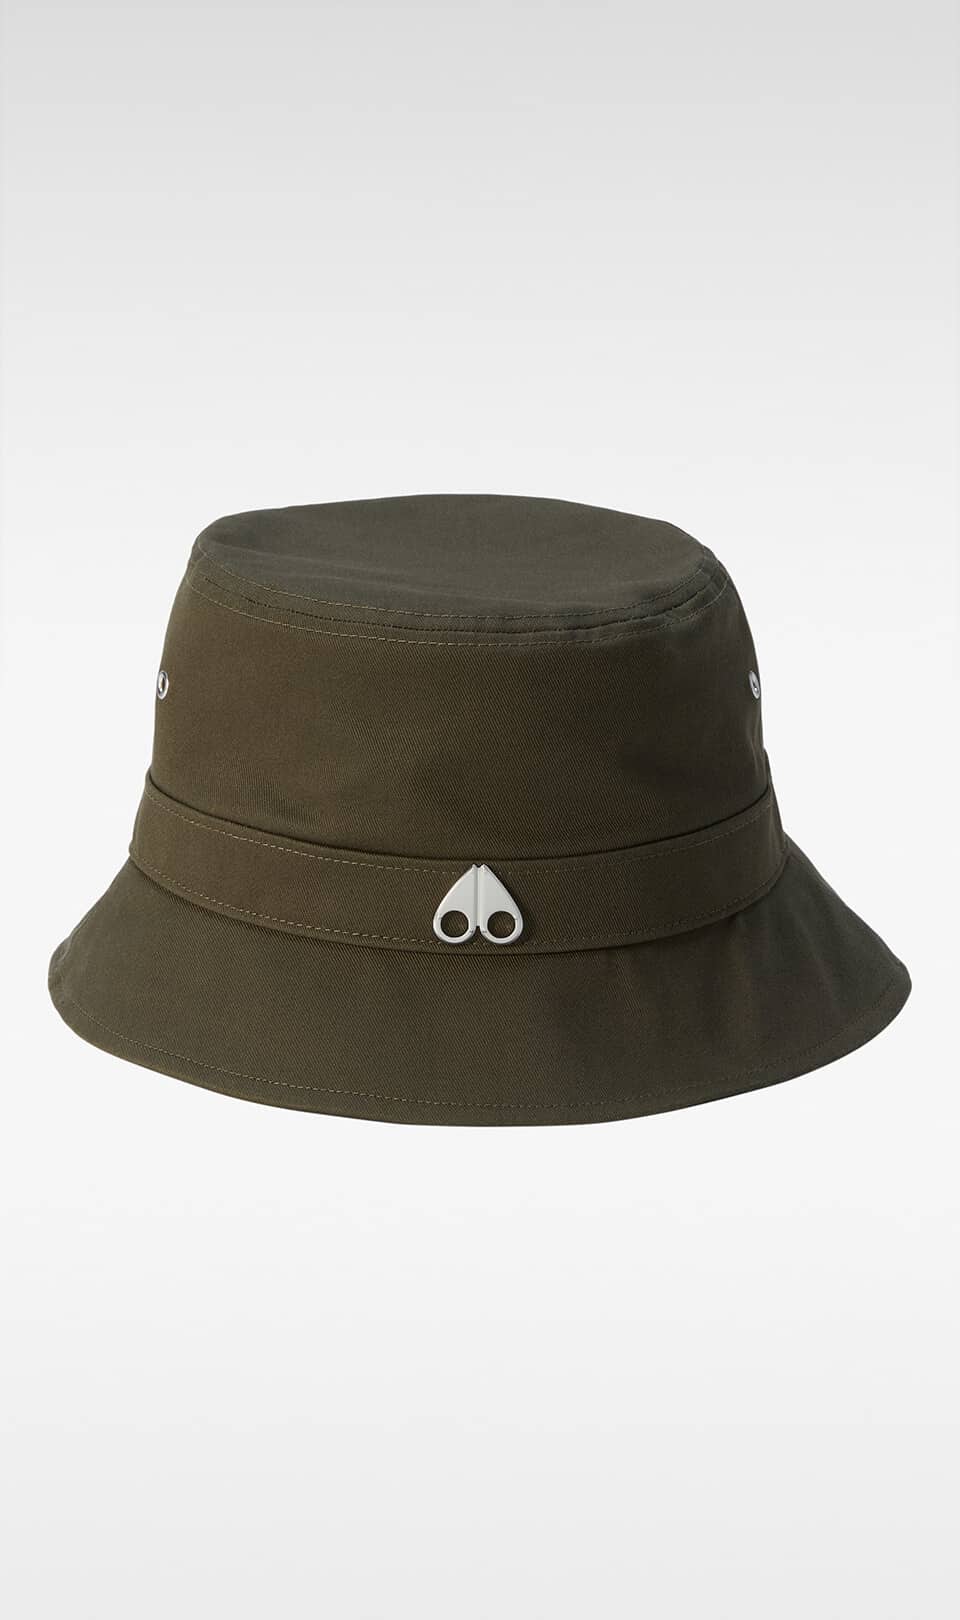 INSERT Moose Knuckles Spring Summer 2022 New Collection Sugar Beach Bucket Hat Military Green